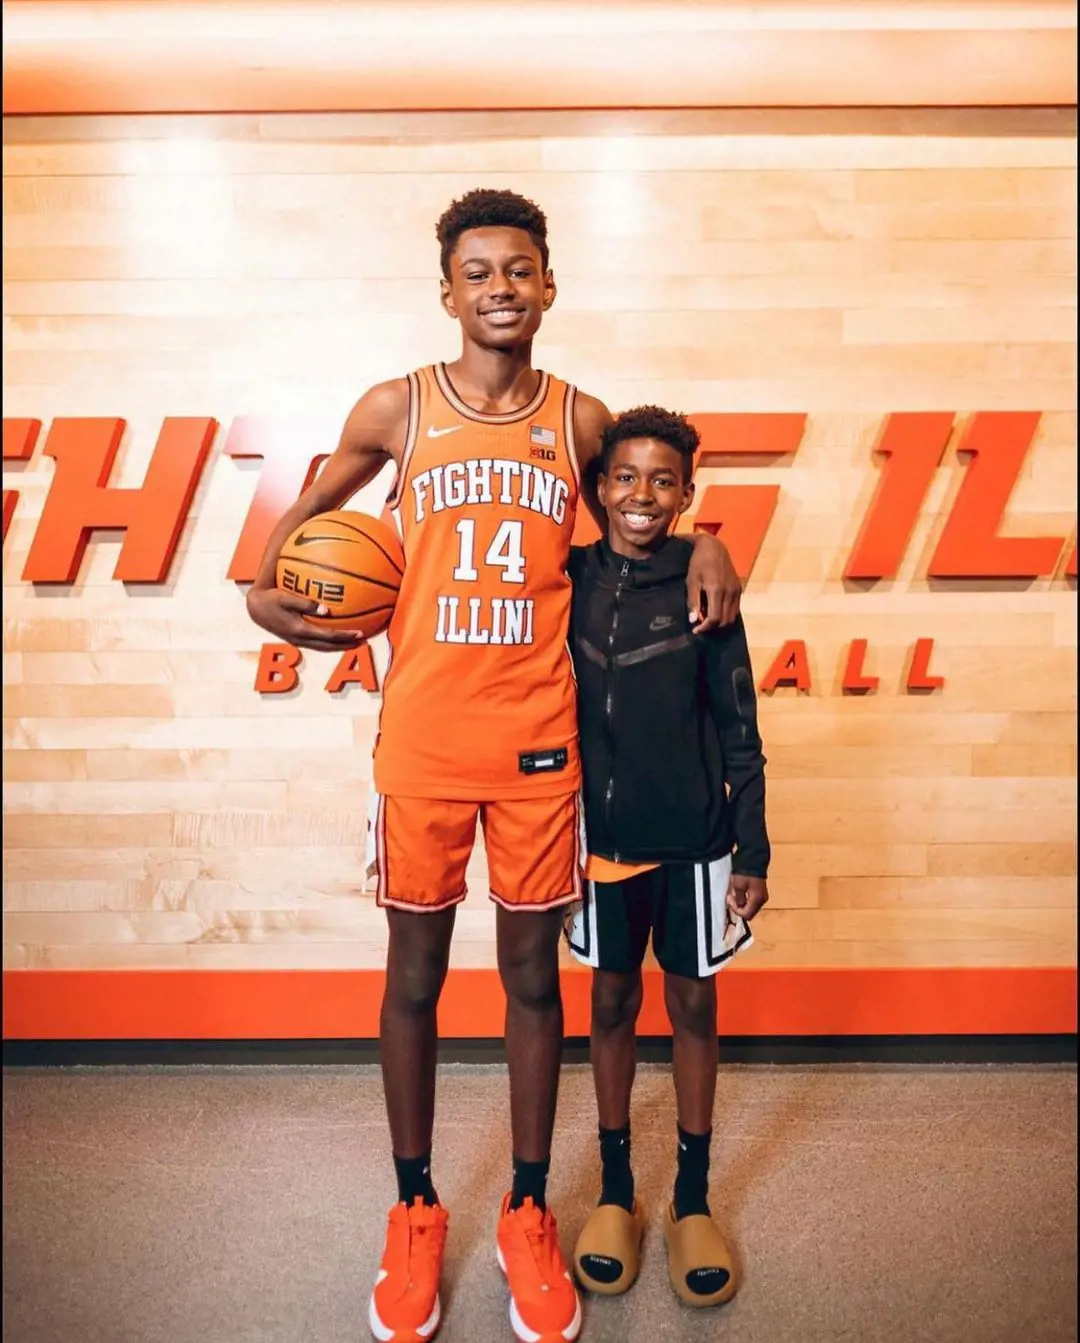 Kanon (Left) sporting Fighting Illini's 14 number jersey in June 2022